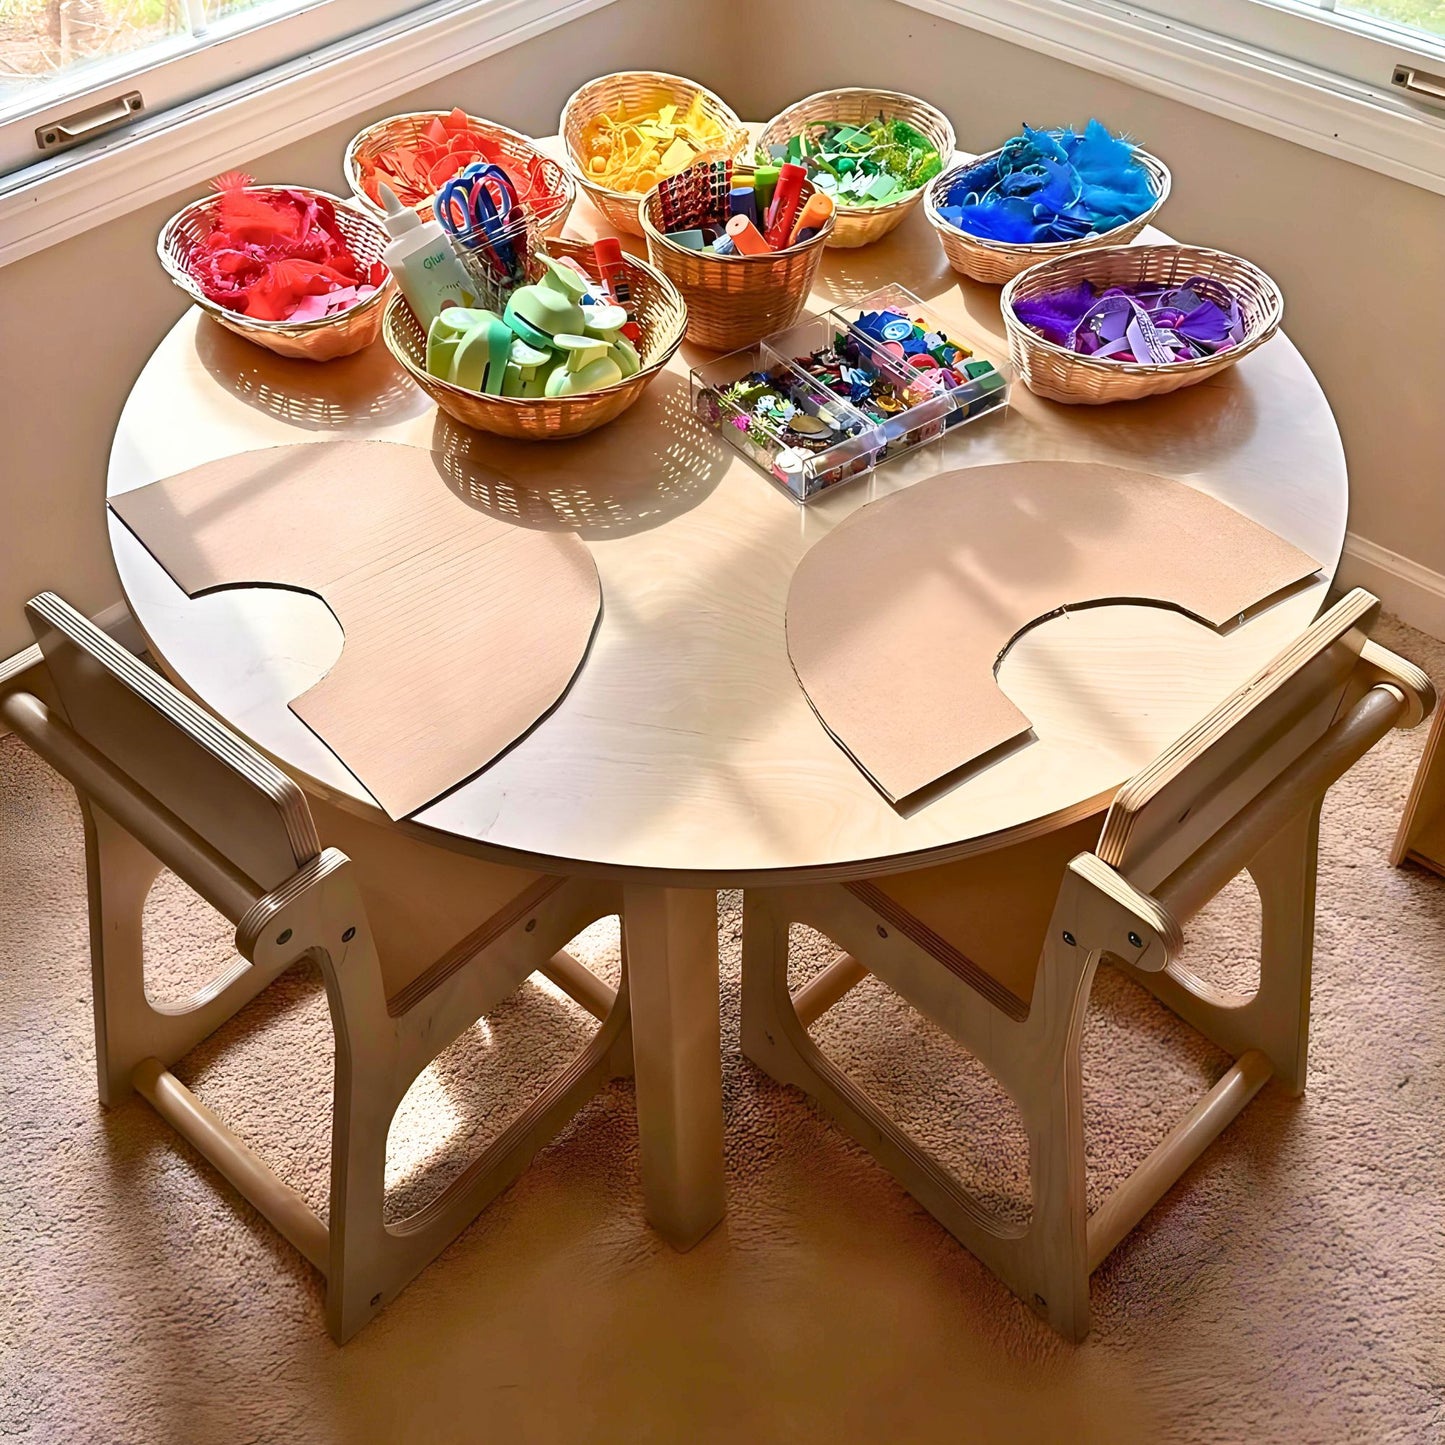 36 inch round table with preschool chairs for montessori home school